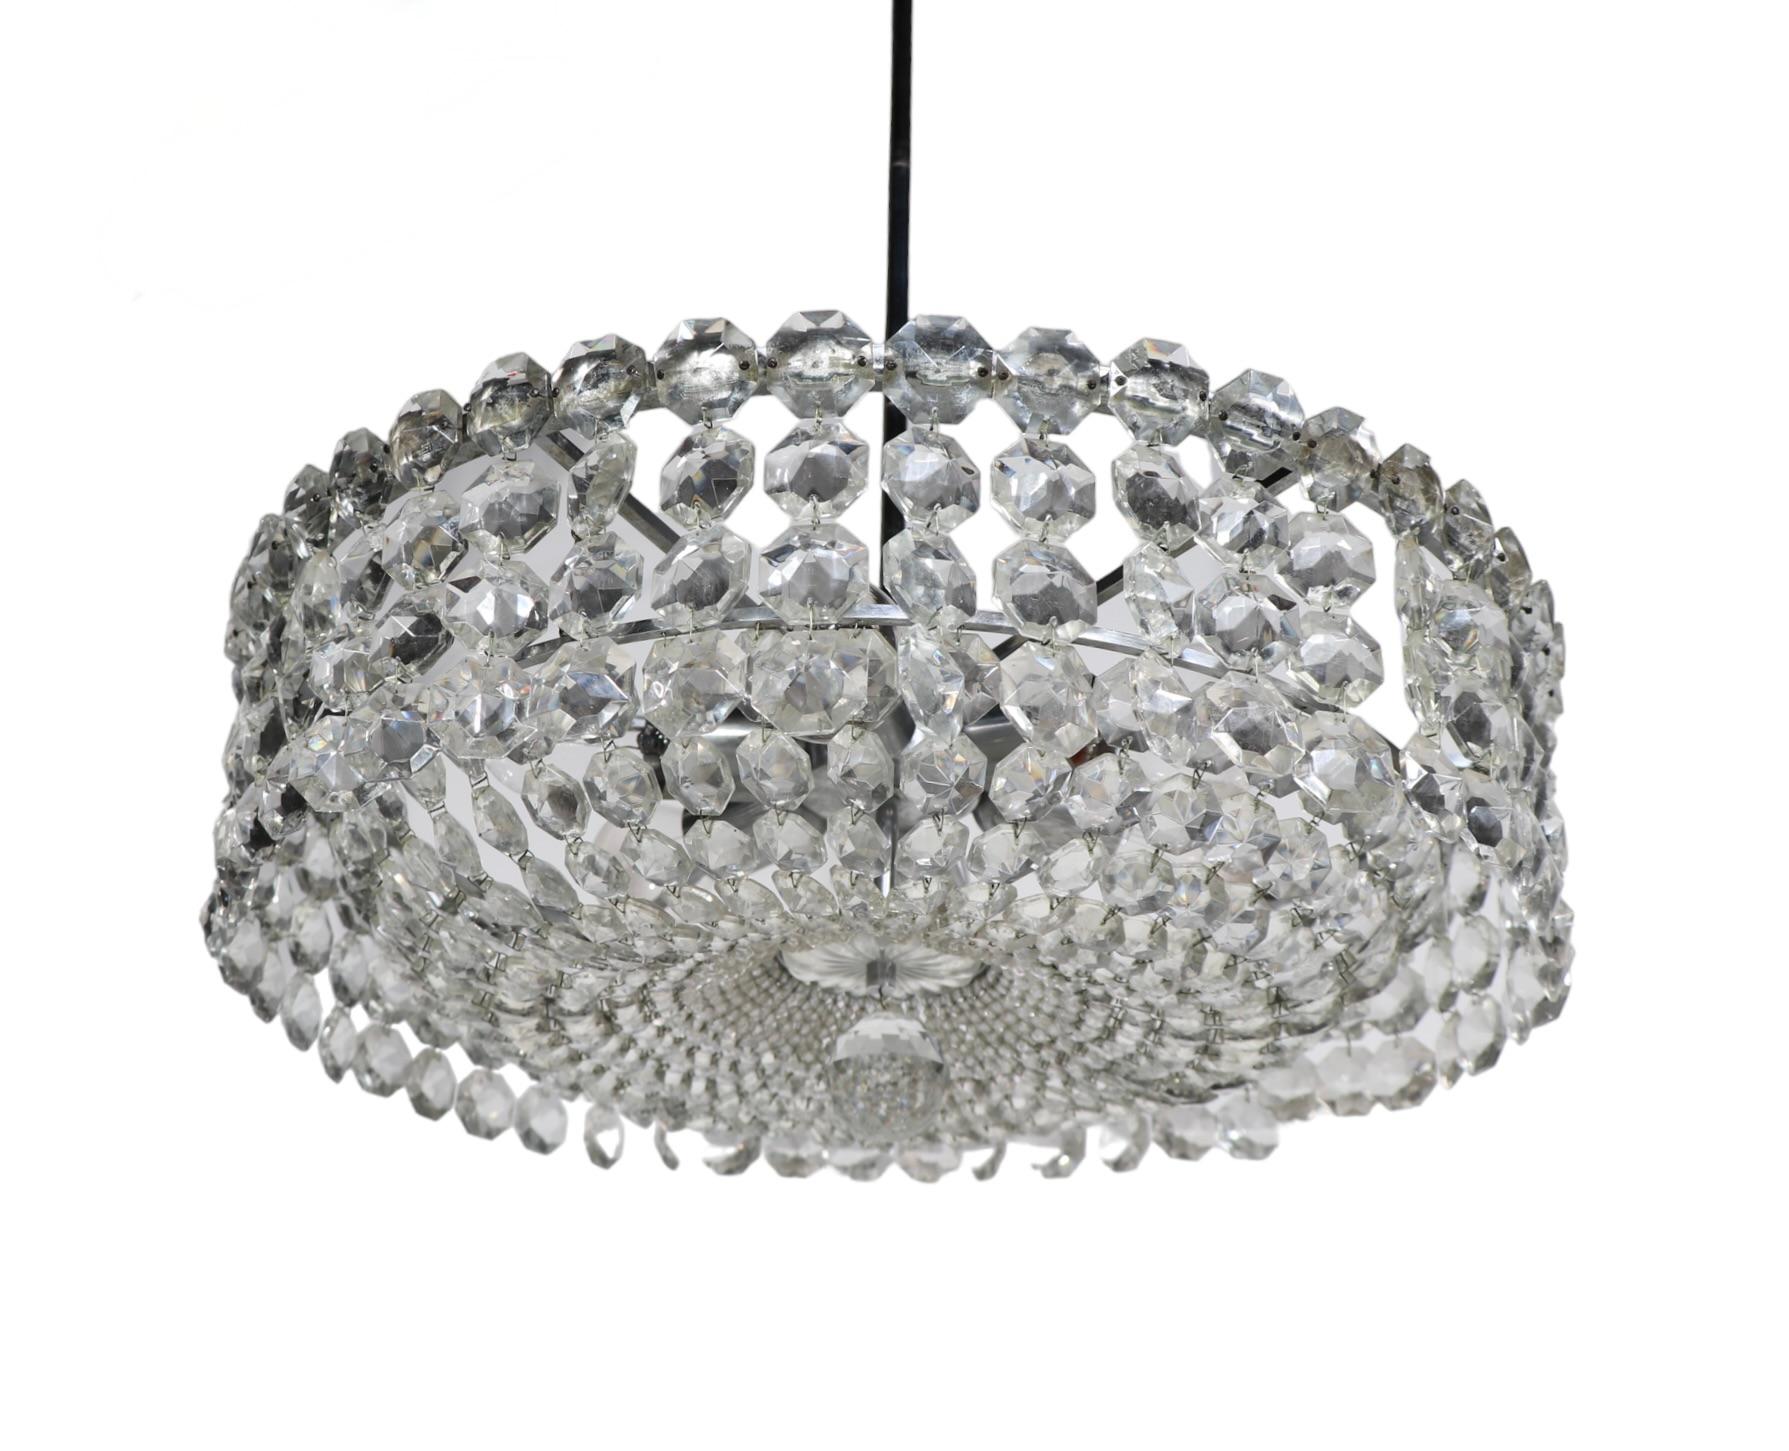 Glamorous Hollywood Regency period hanging fixture by noted American maker, Prescolite, circa 1960-1970's. The chandelier features s beaded basket like bottom surrounded by a ring of faceted glass at the outer edge. The frame is of bright chrome, as